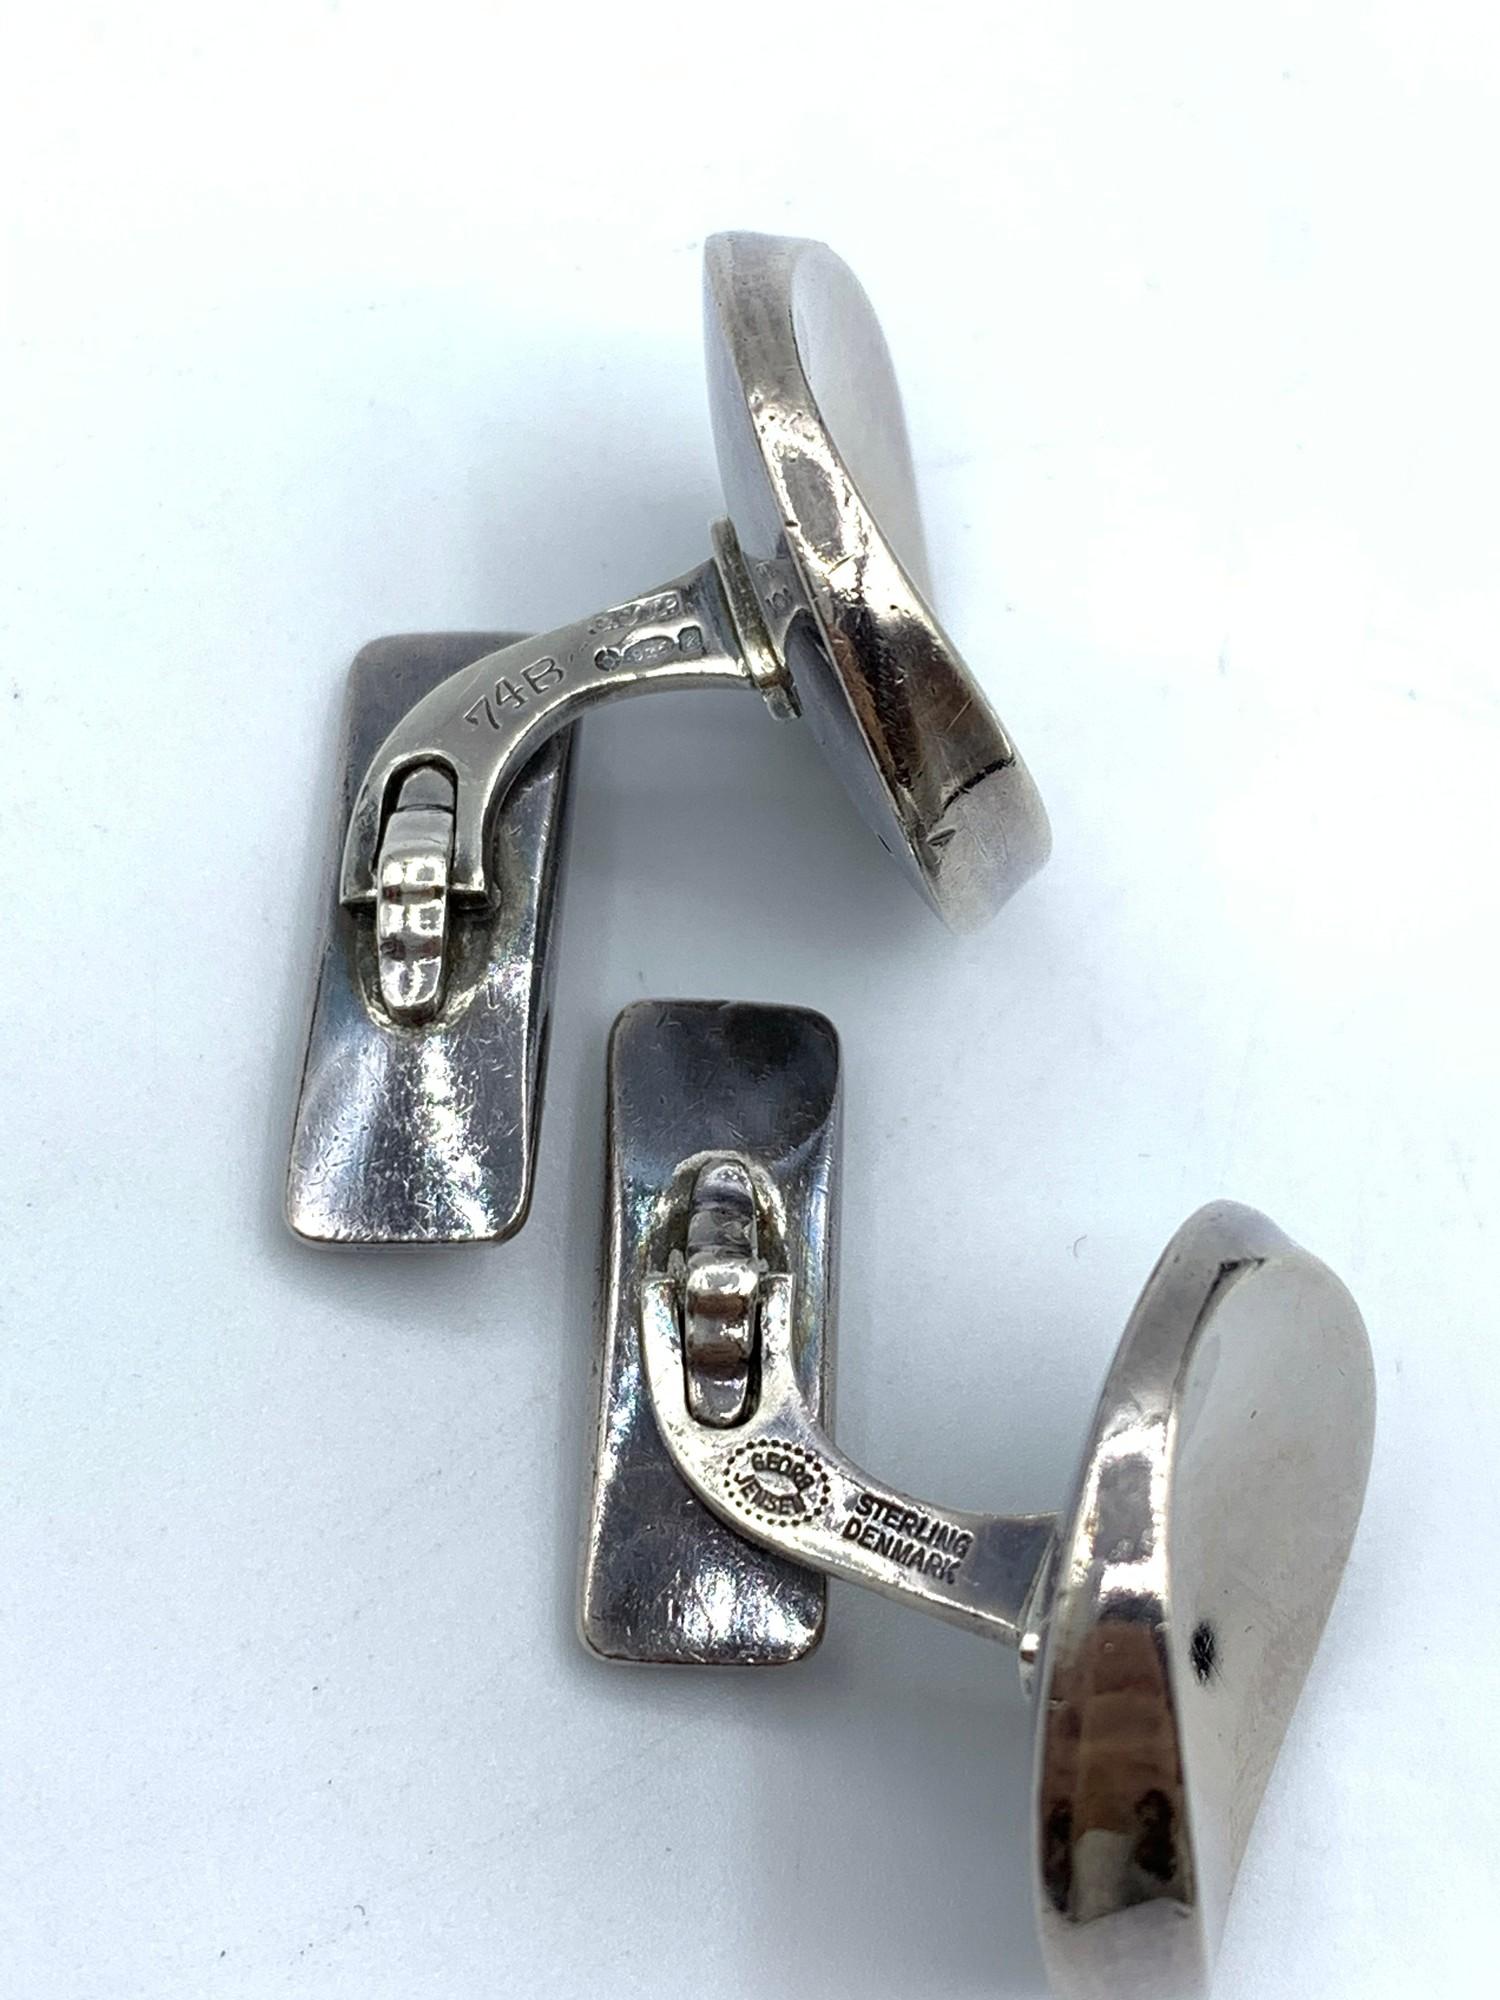 Pair of Georg Jensen Silver Cufflinks in original Box, weight 21.7g and size 25x30mm approx - Image 2 of 3